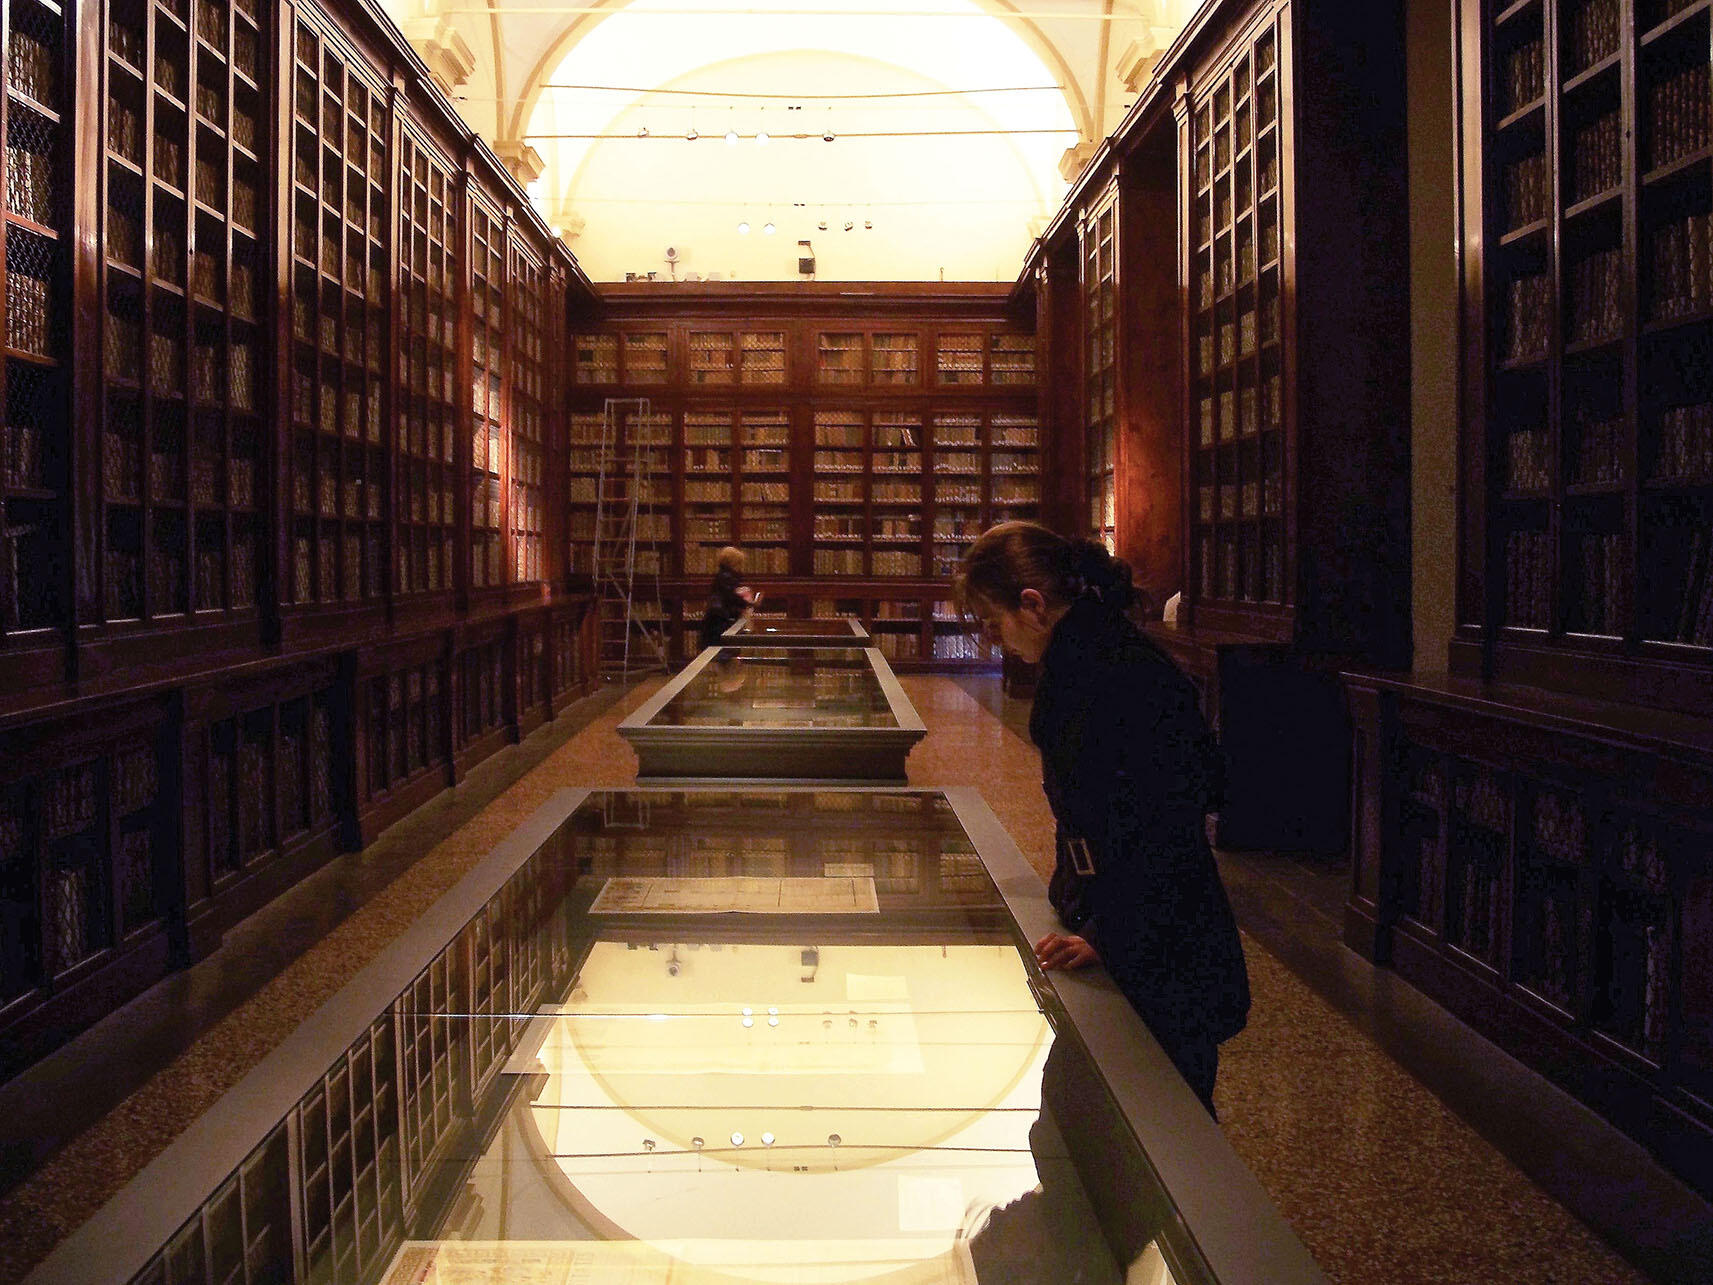 The quiet stacks and antique wood of the library of the University of Bologna. (Photo by Anna Hesser.)